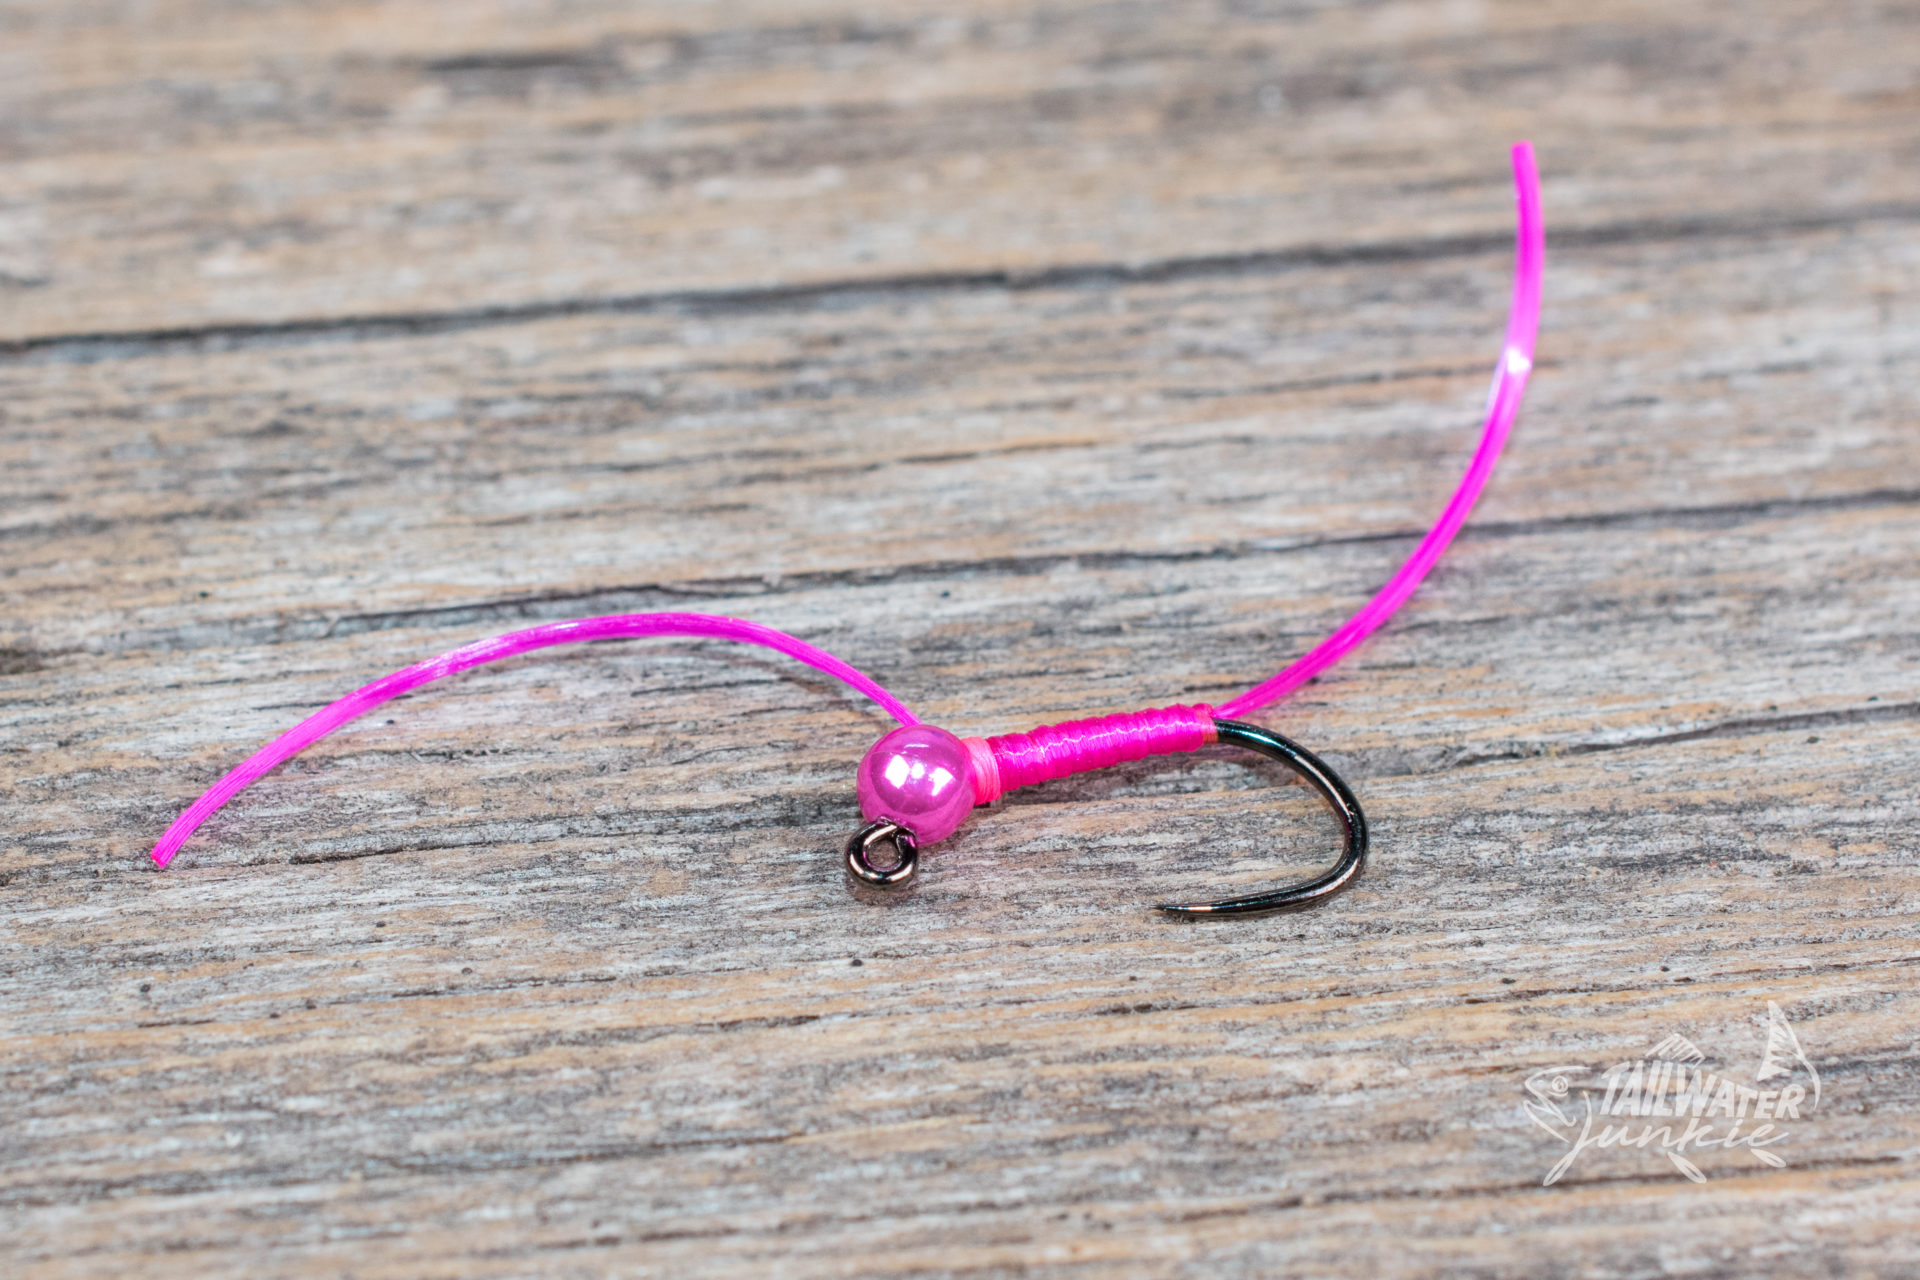 Flossy Worm Jig (3 Pack) - Tailwater Junkie